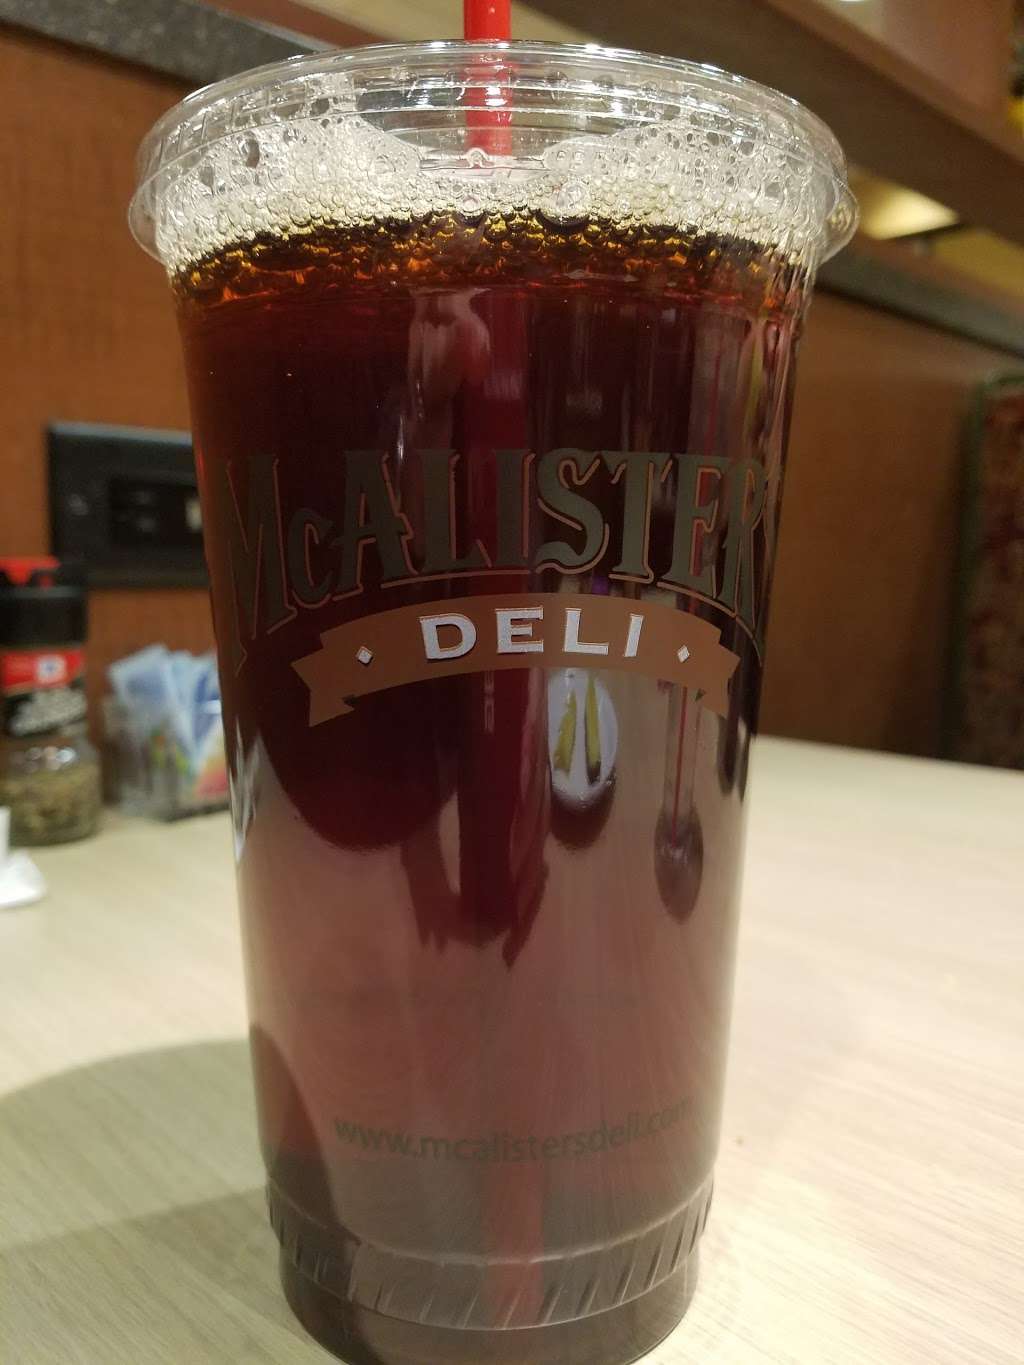 McAlisters Deli | 1410 E Main St, Plainfield, IN 46168 | Phone: (317) 203-6649